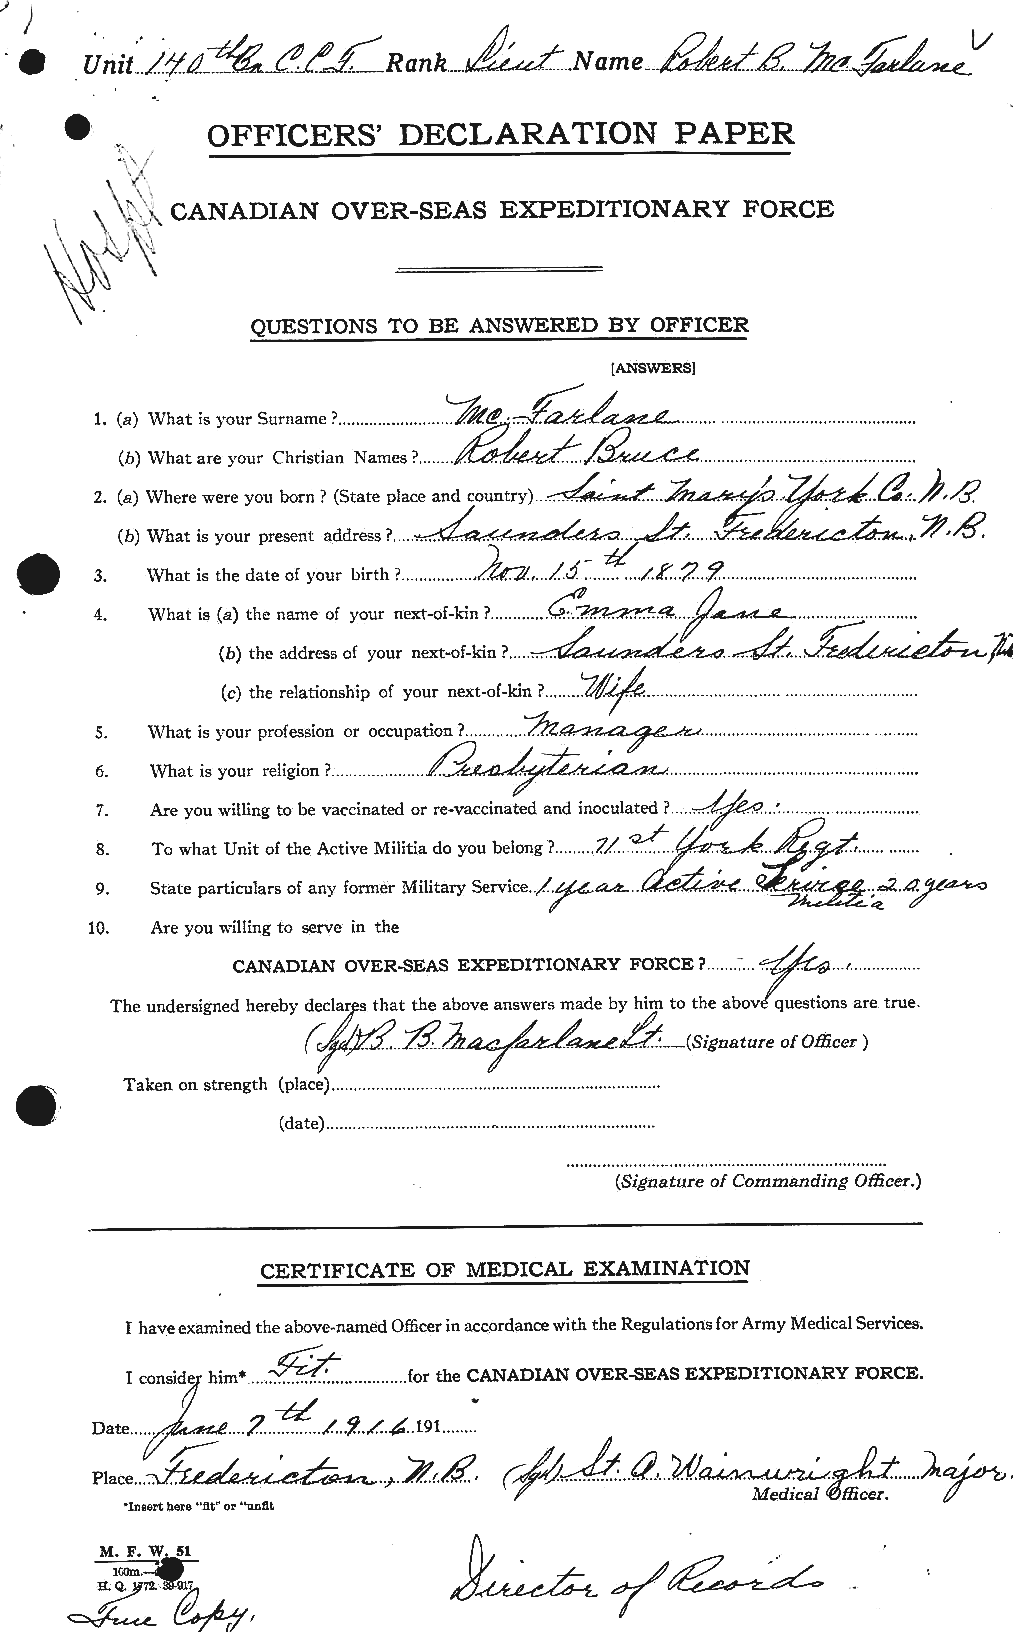 Personnel Records of the First World War - CEF 522766a